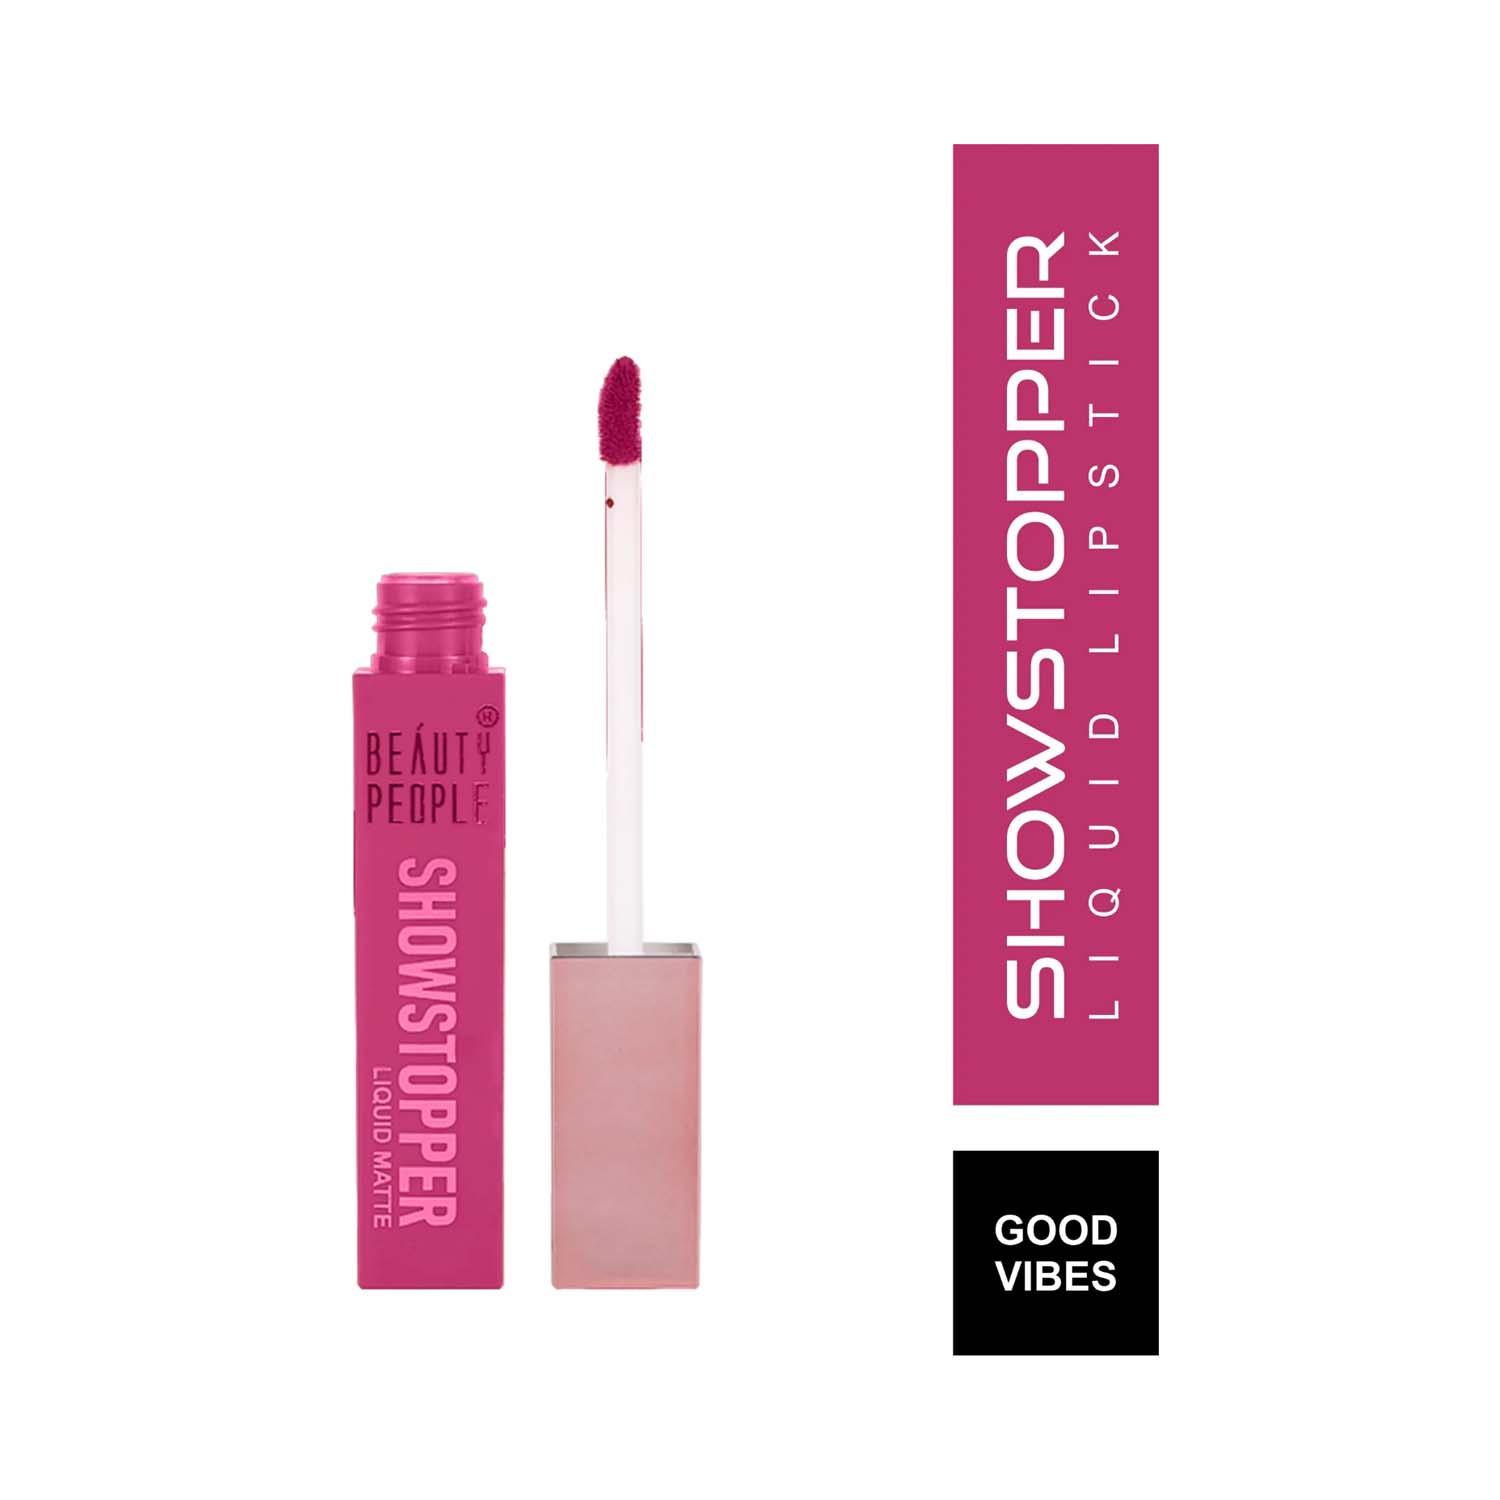 Beauty People | Beauty People Showstopper Liquid Lip Color with SPF 15 & Vitamin E - 09 Good Vibes (4ml)